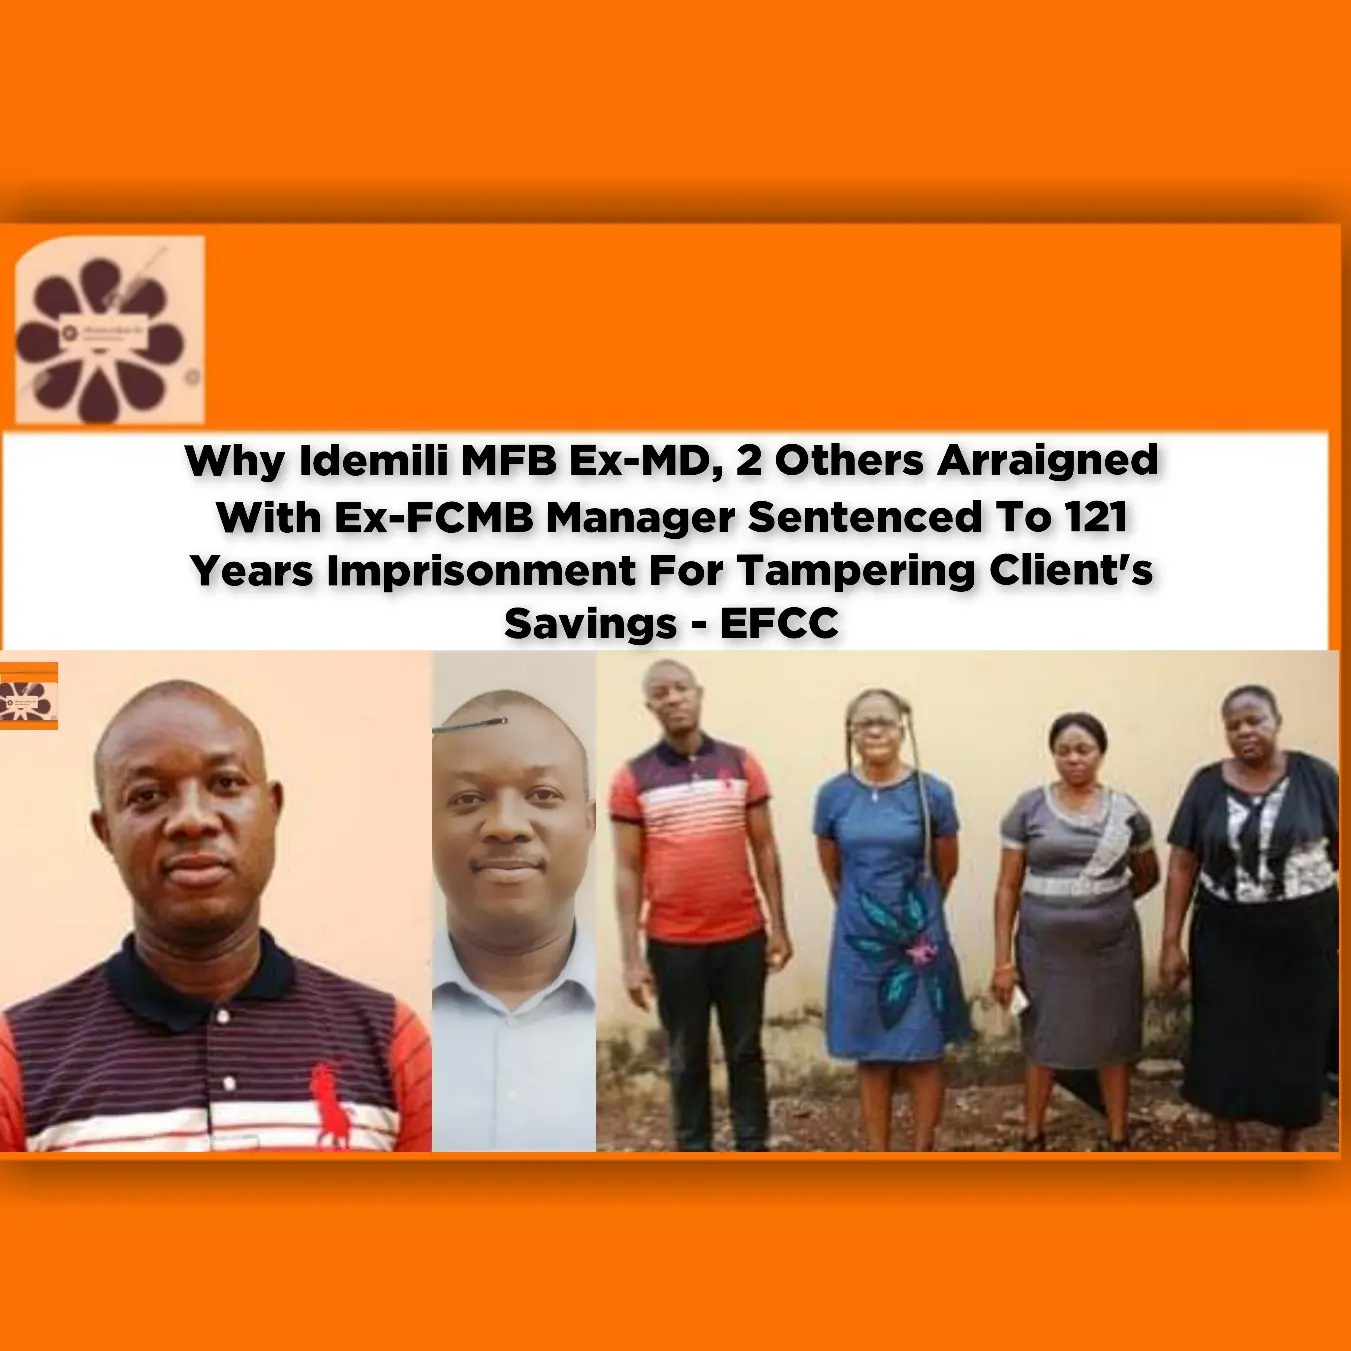 Why Idemili MFB Ex-MD, 2 Others Arraigned With Ex-FCMB Manager Sentenced To 121 Years Imprisonment For Tampering Client's Savings - EFCC ~ OsazuwaAkonedo Health